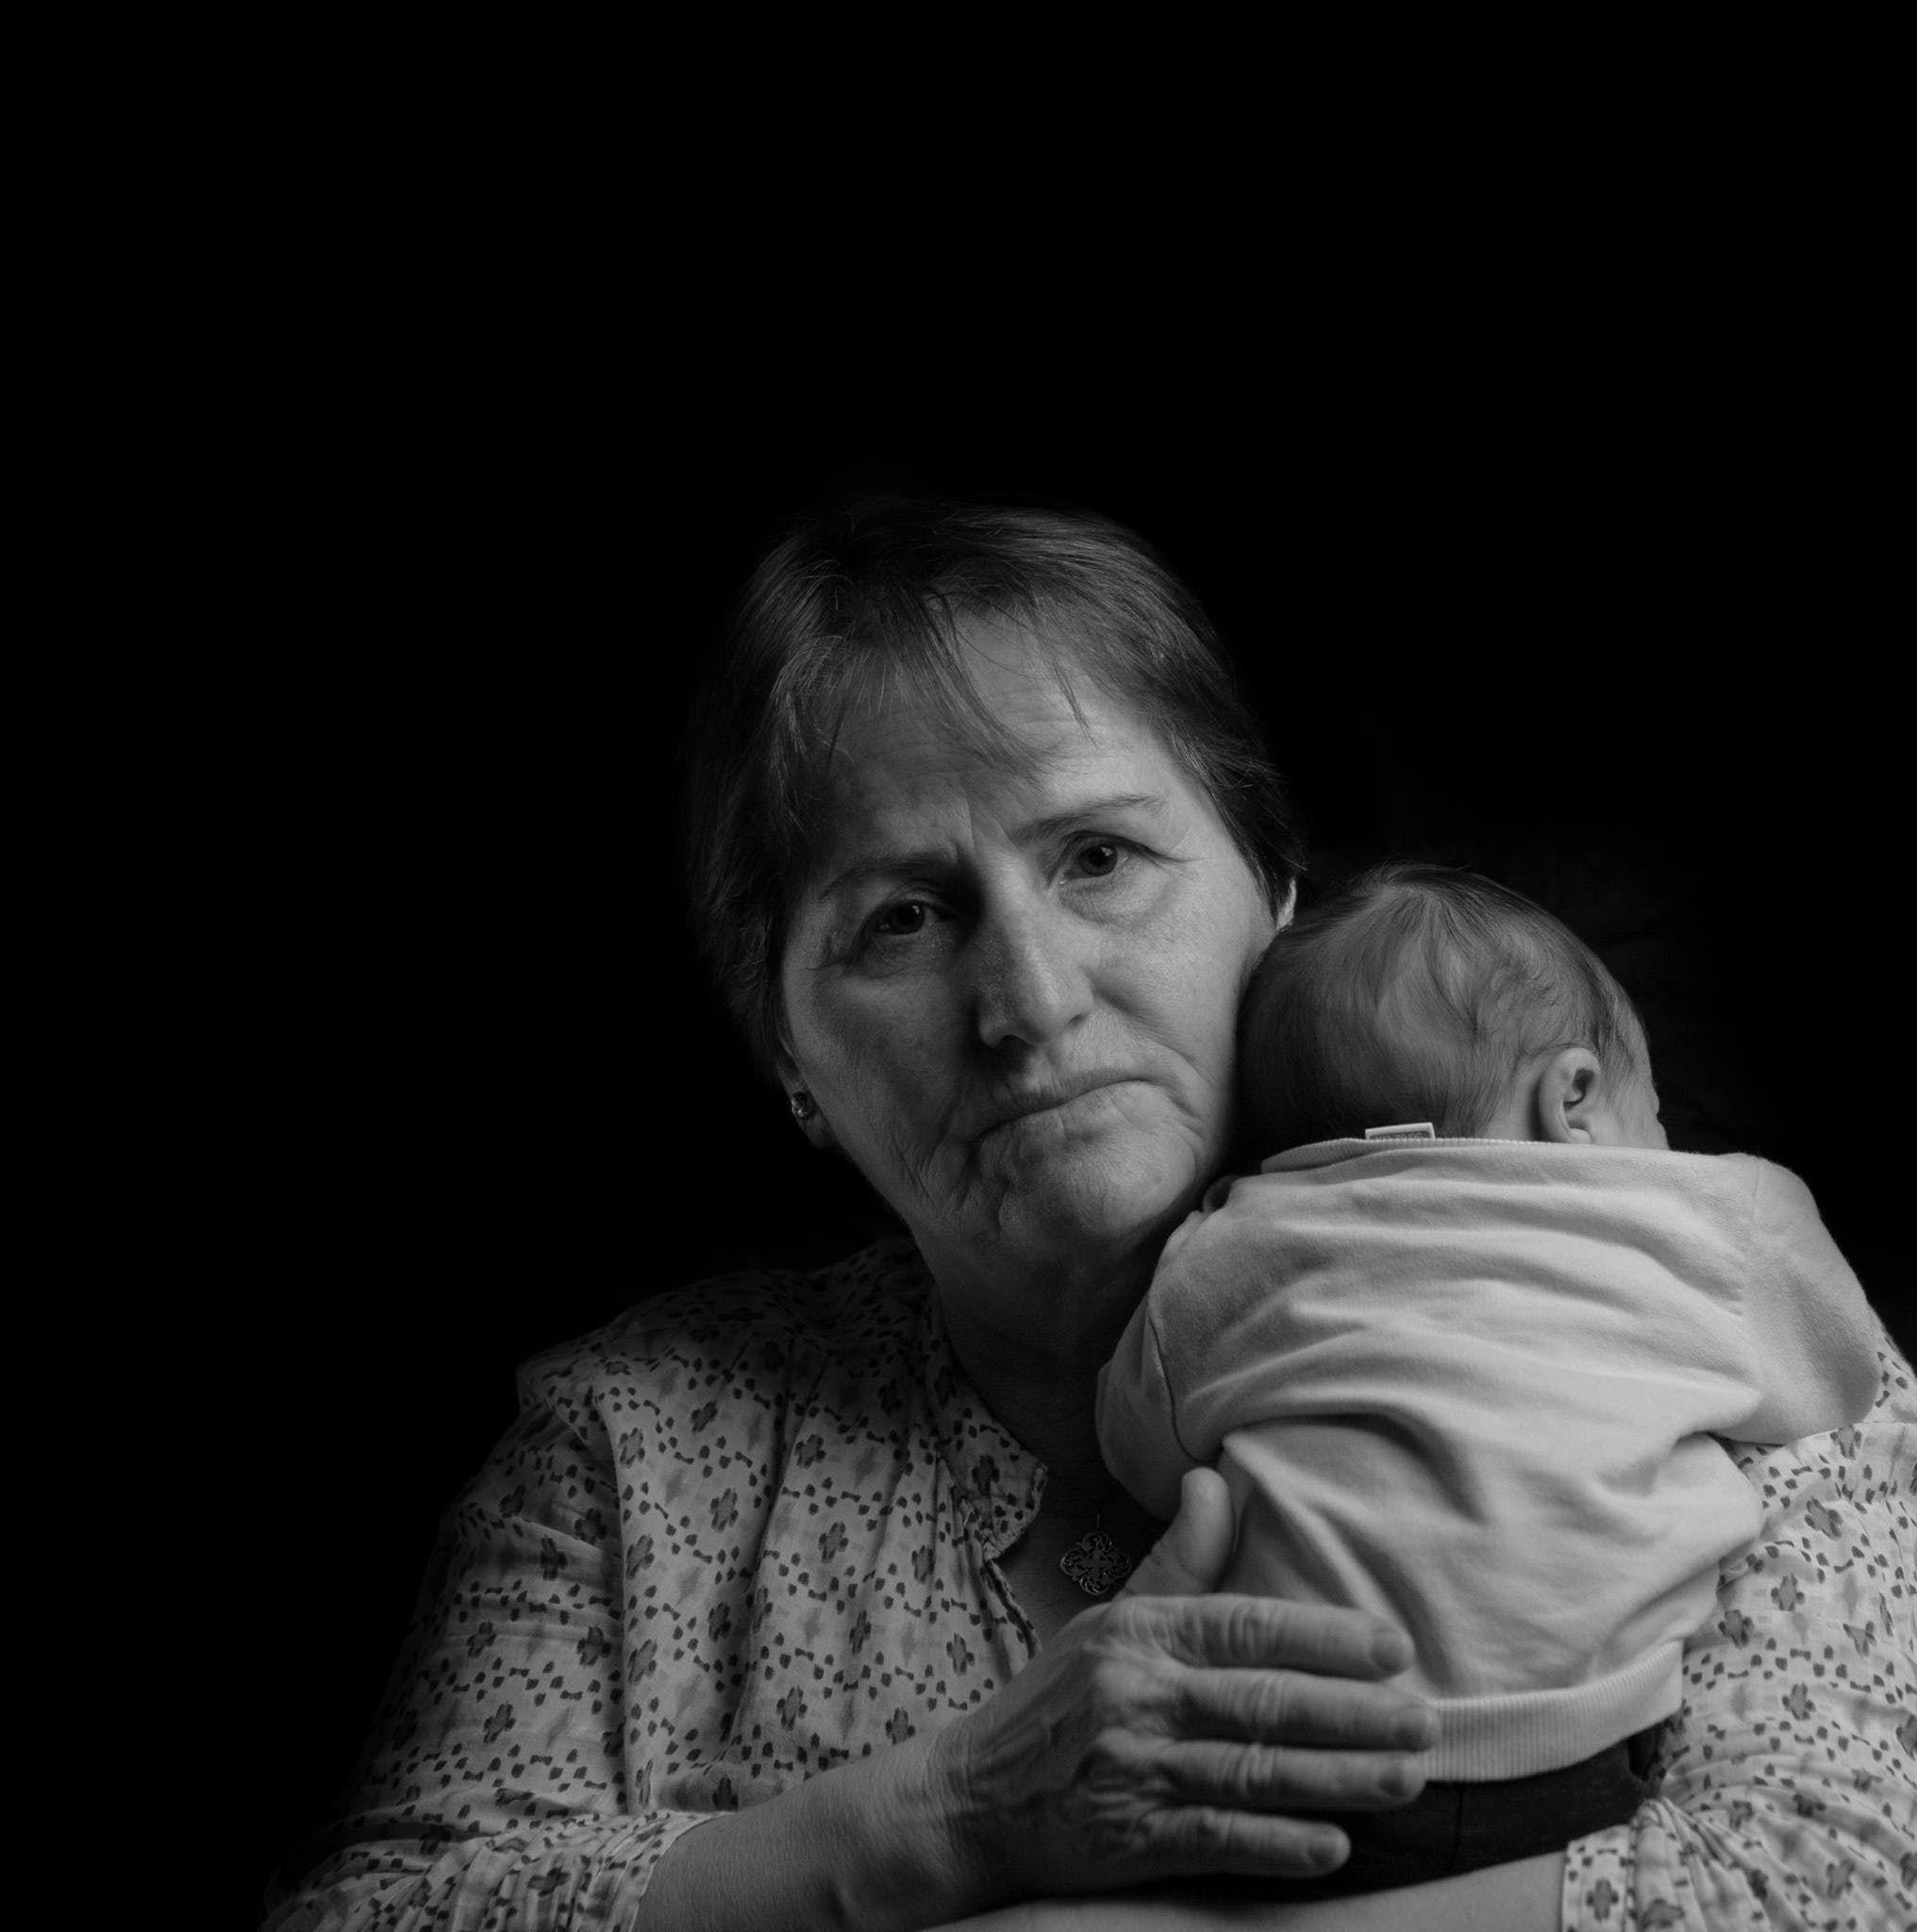 A woman holding a baby | Source: Pexels